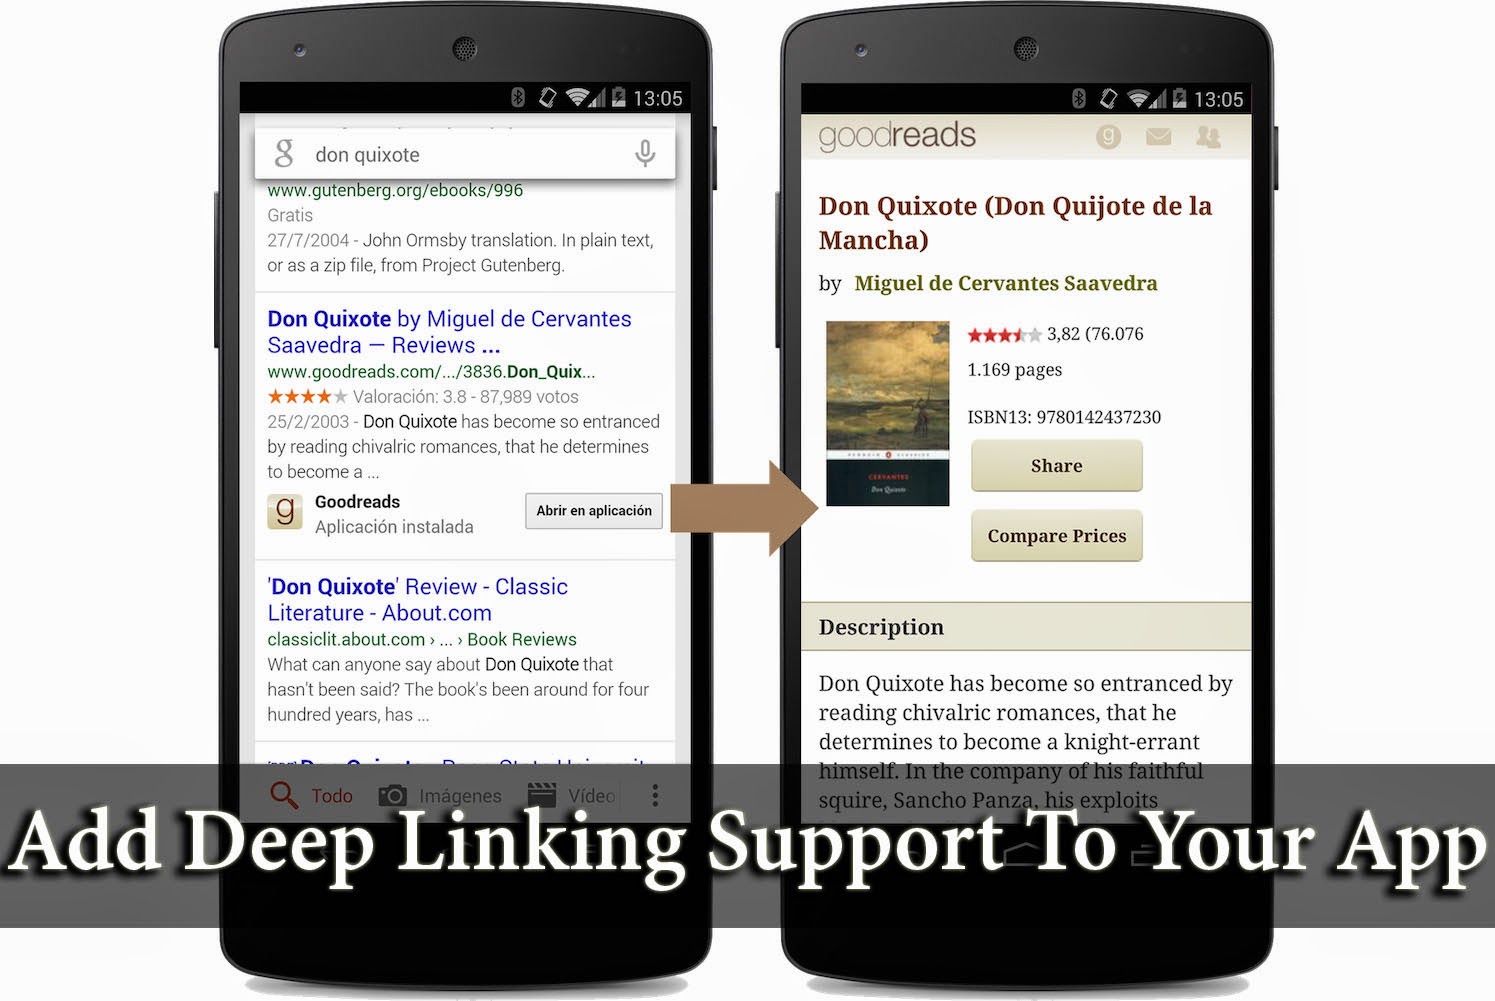 Add deep linking support to your app